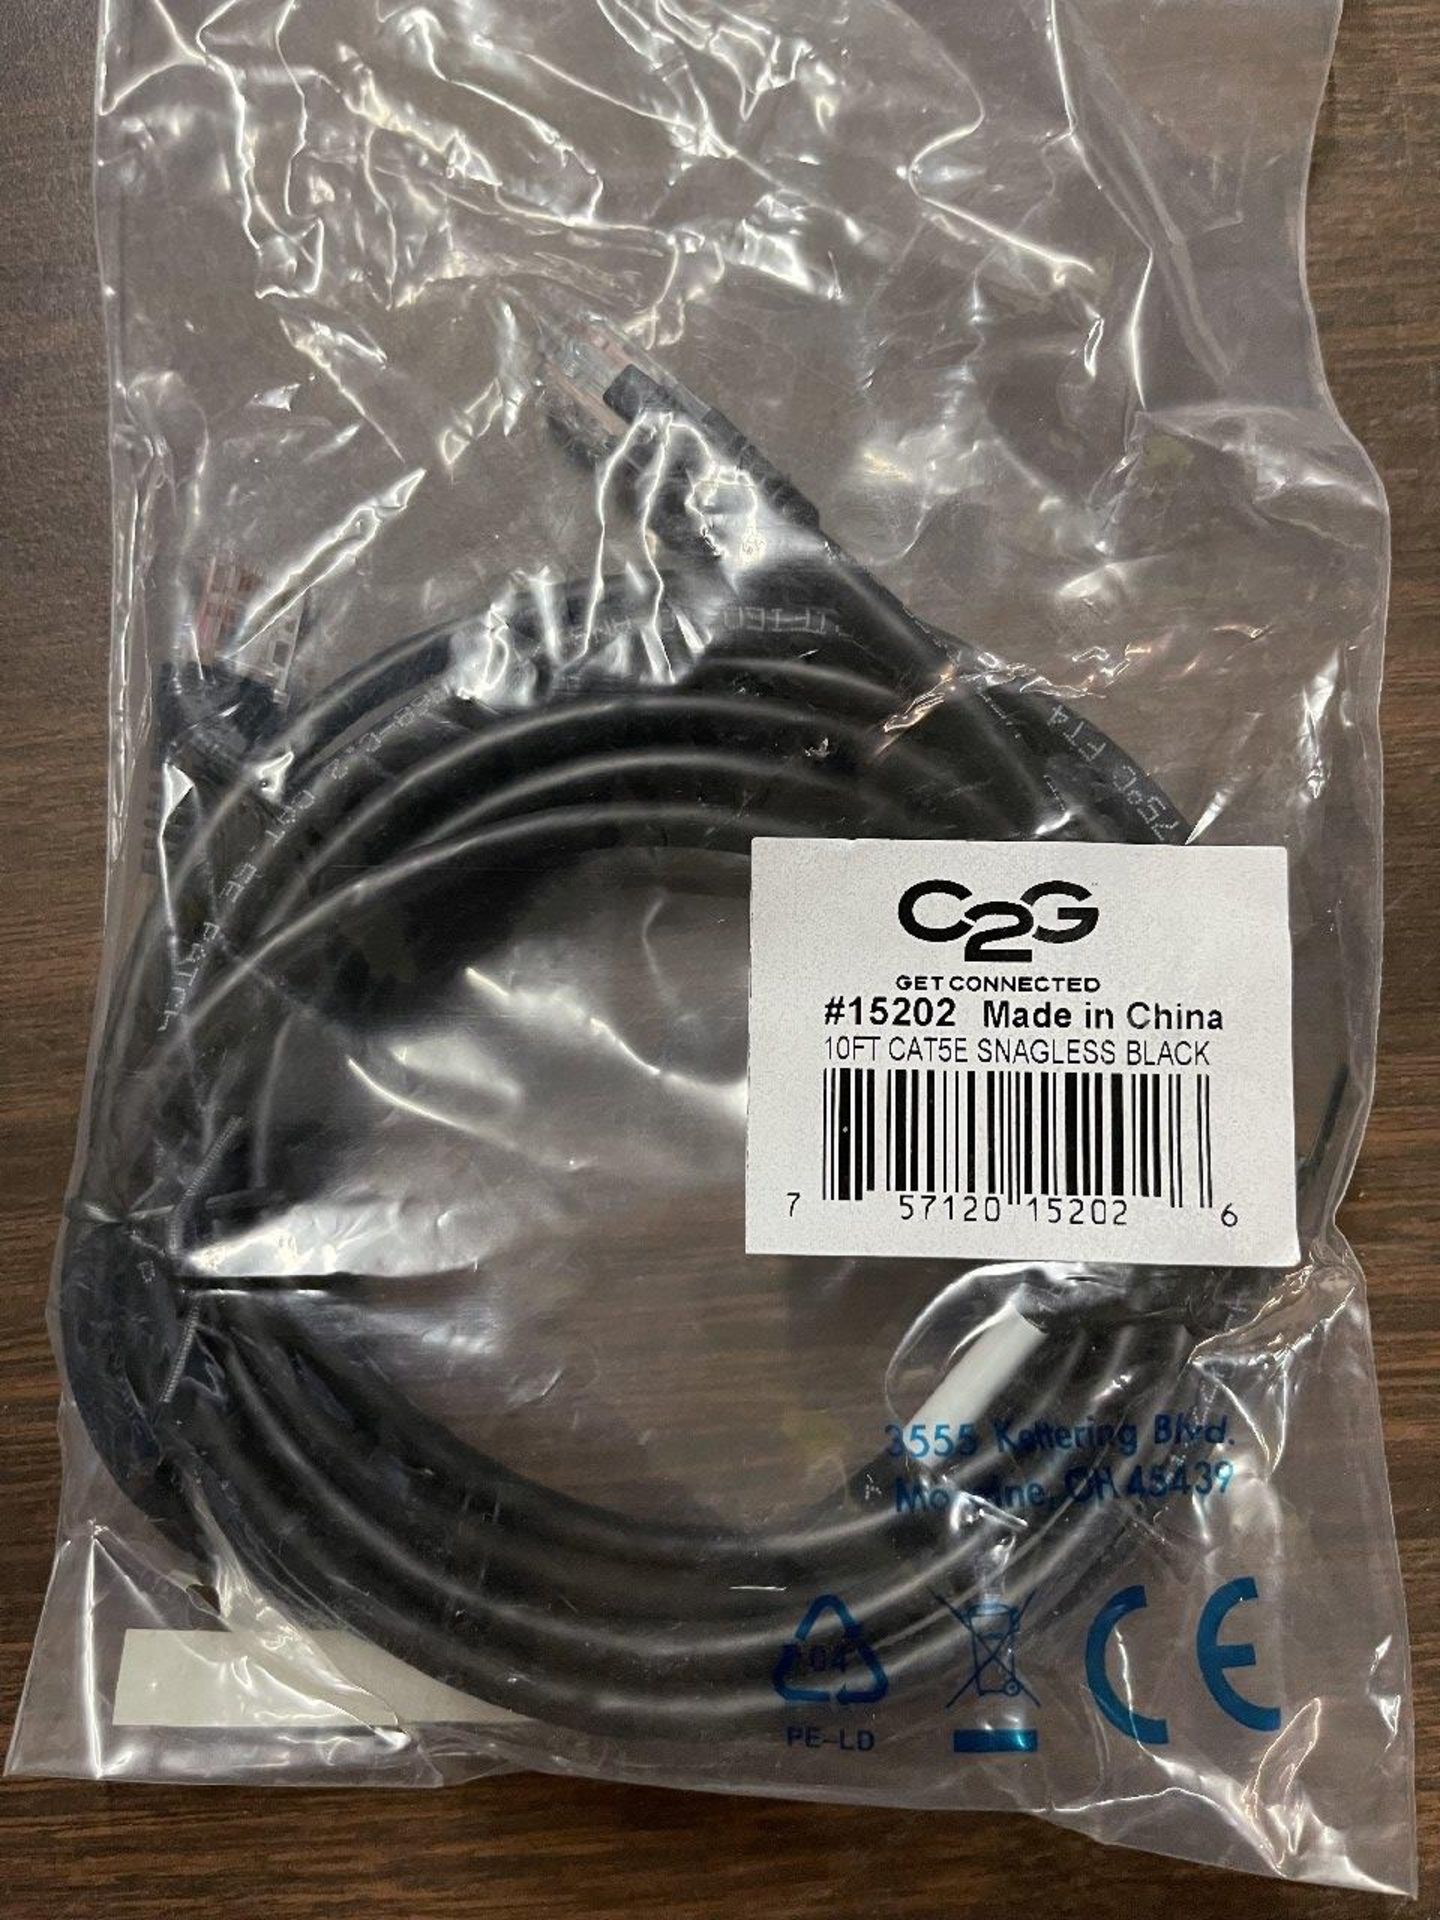 Get Connected C2G 10ft CAT5E Snagless Black Ethernet Cables - Image 2 of 3